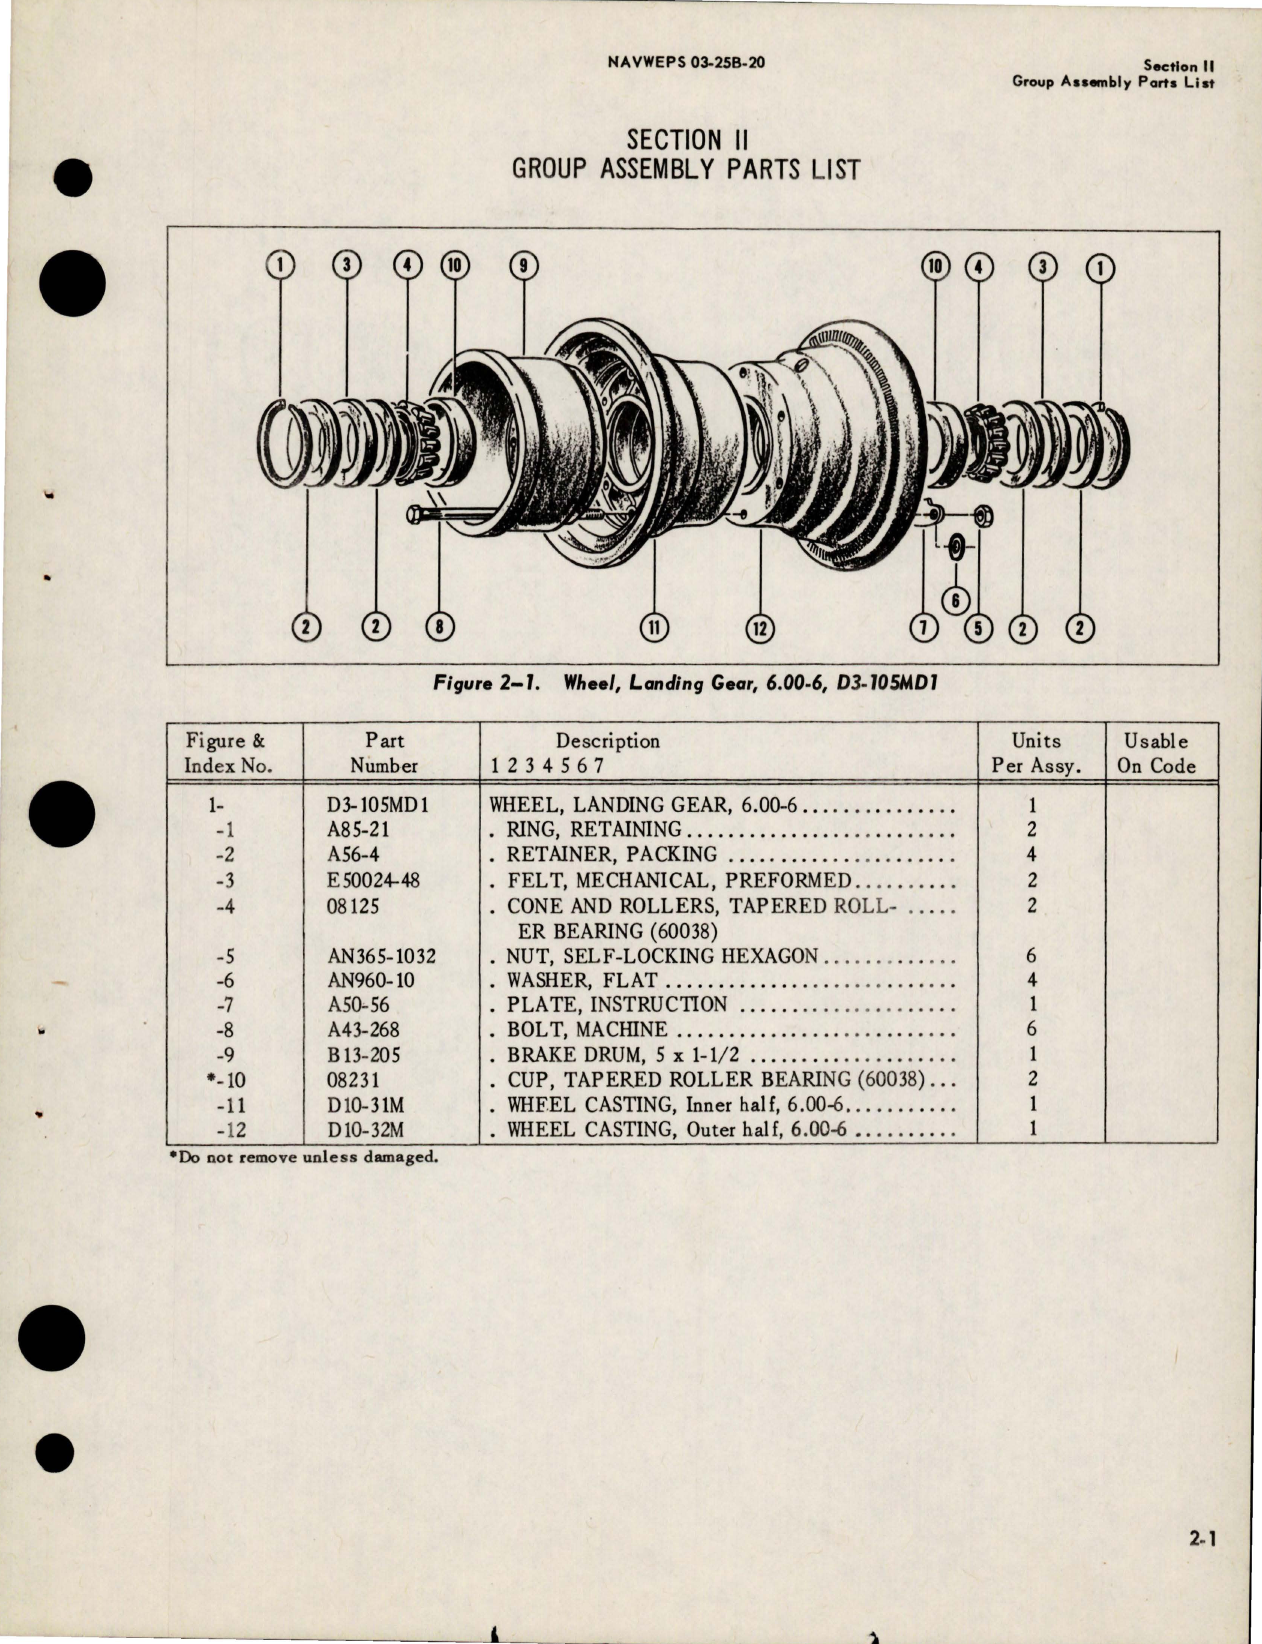 Sample page 9 from AirCorps Library document: Illustrated Parts Breakdown for Main Landing Gear Wheels 